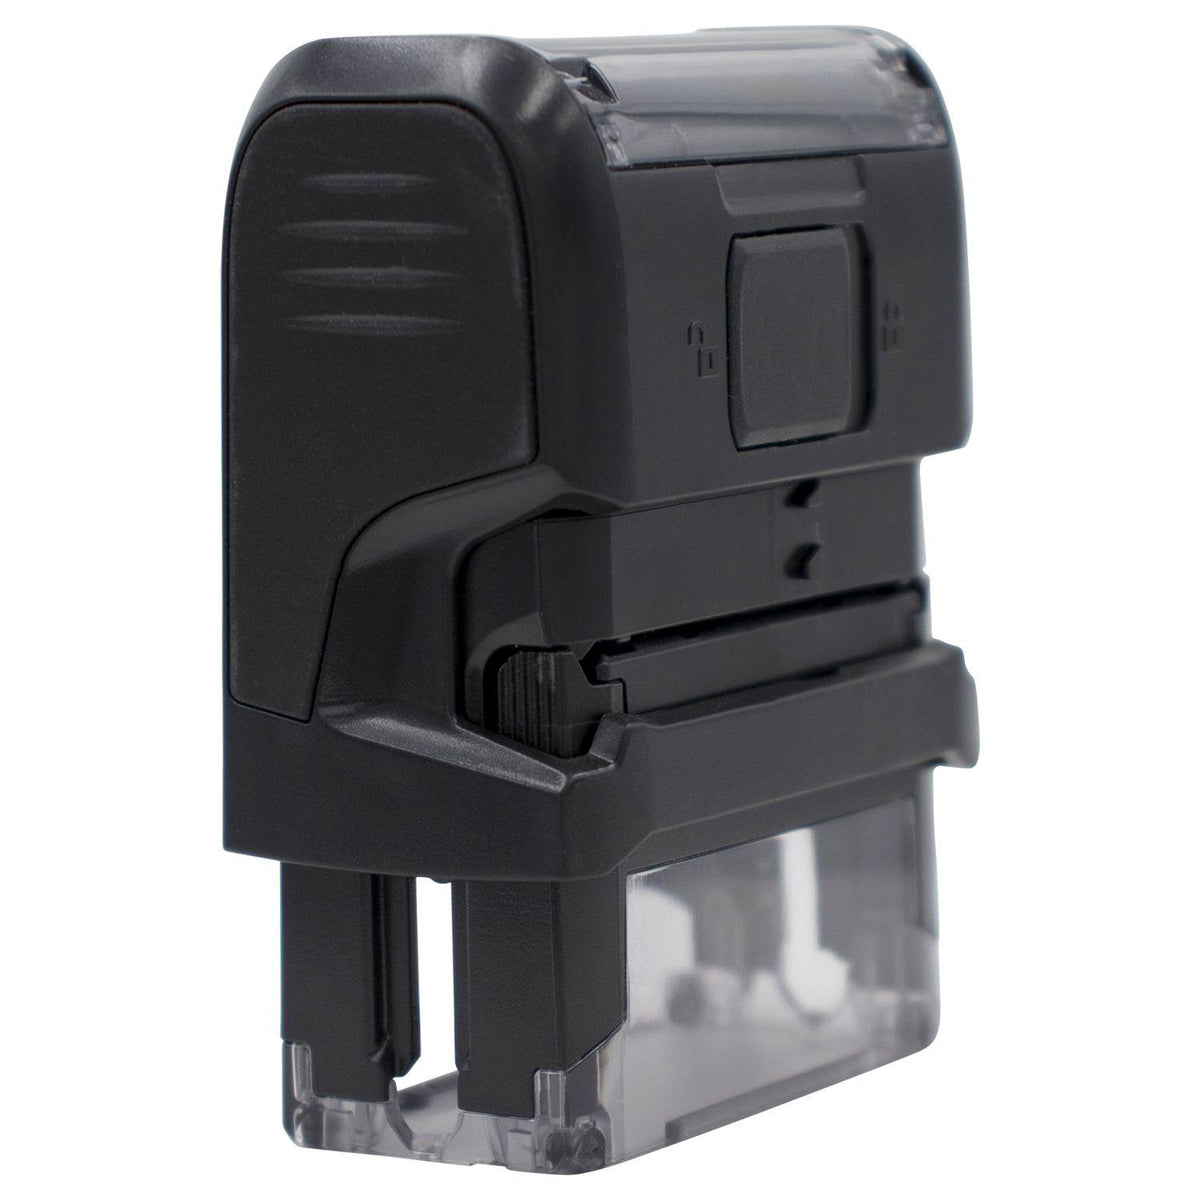 Self-Inking Do Not X-Ray Stamp - Engineer Seal Stamps - Brand_Trodat, Impression Size_Small, Stamp Type_Self-Inking Stamp, Type of Use_Medical Office